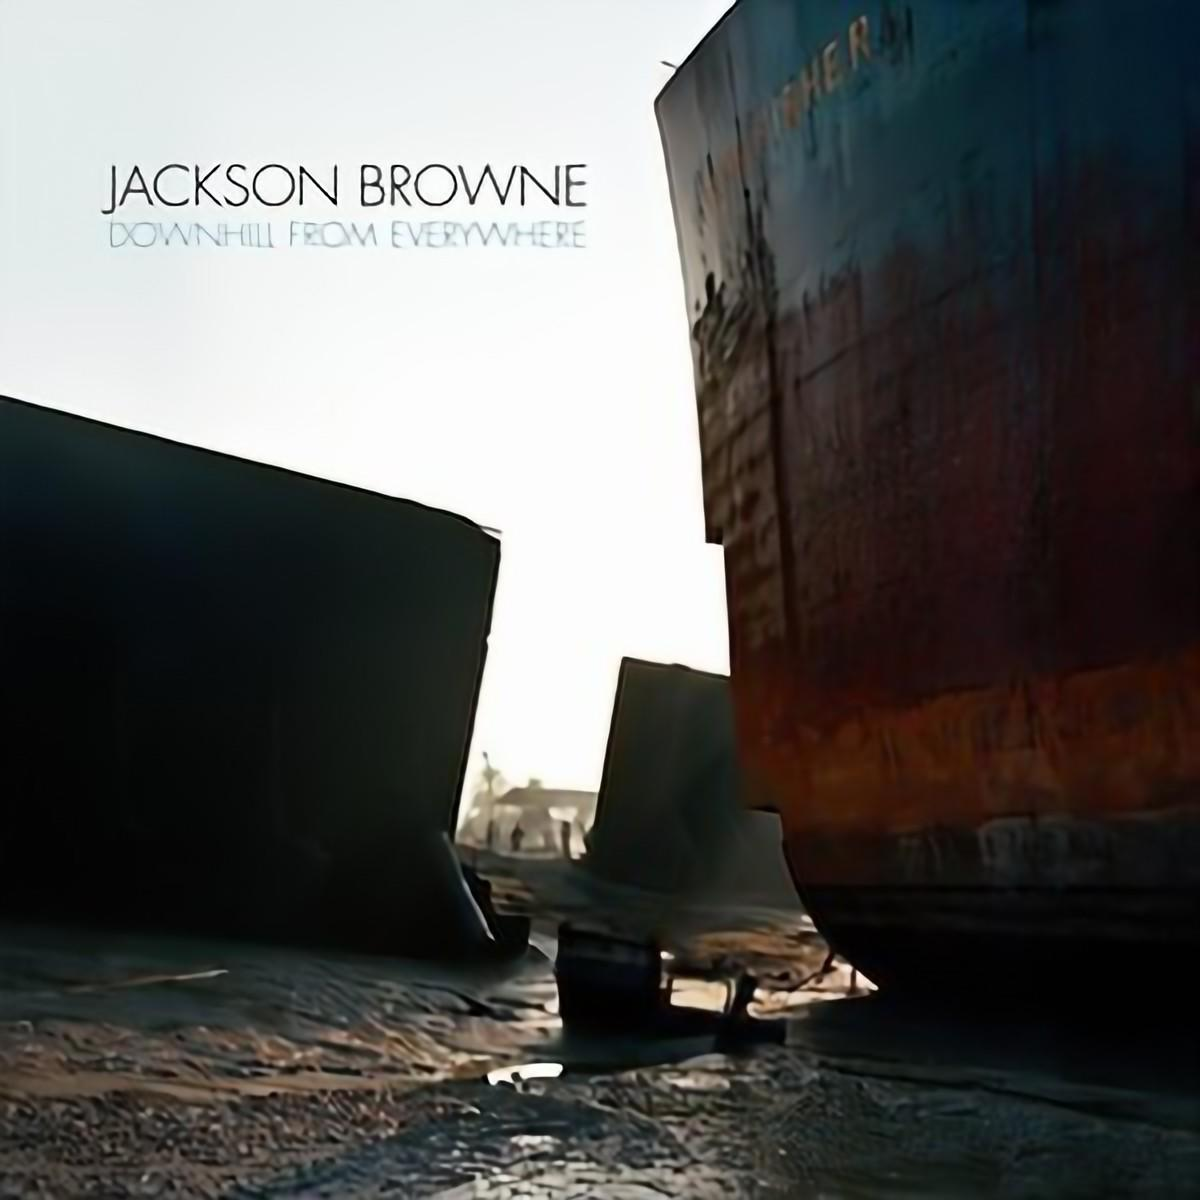 Jackson Browne DOWNHILL (CD) FROM EVERYWHERE - 